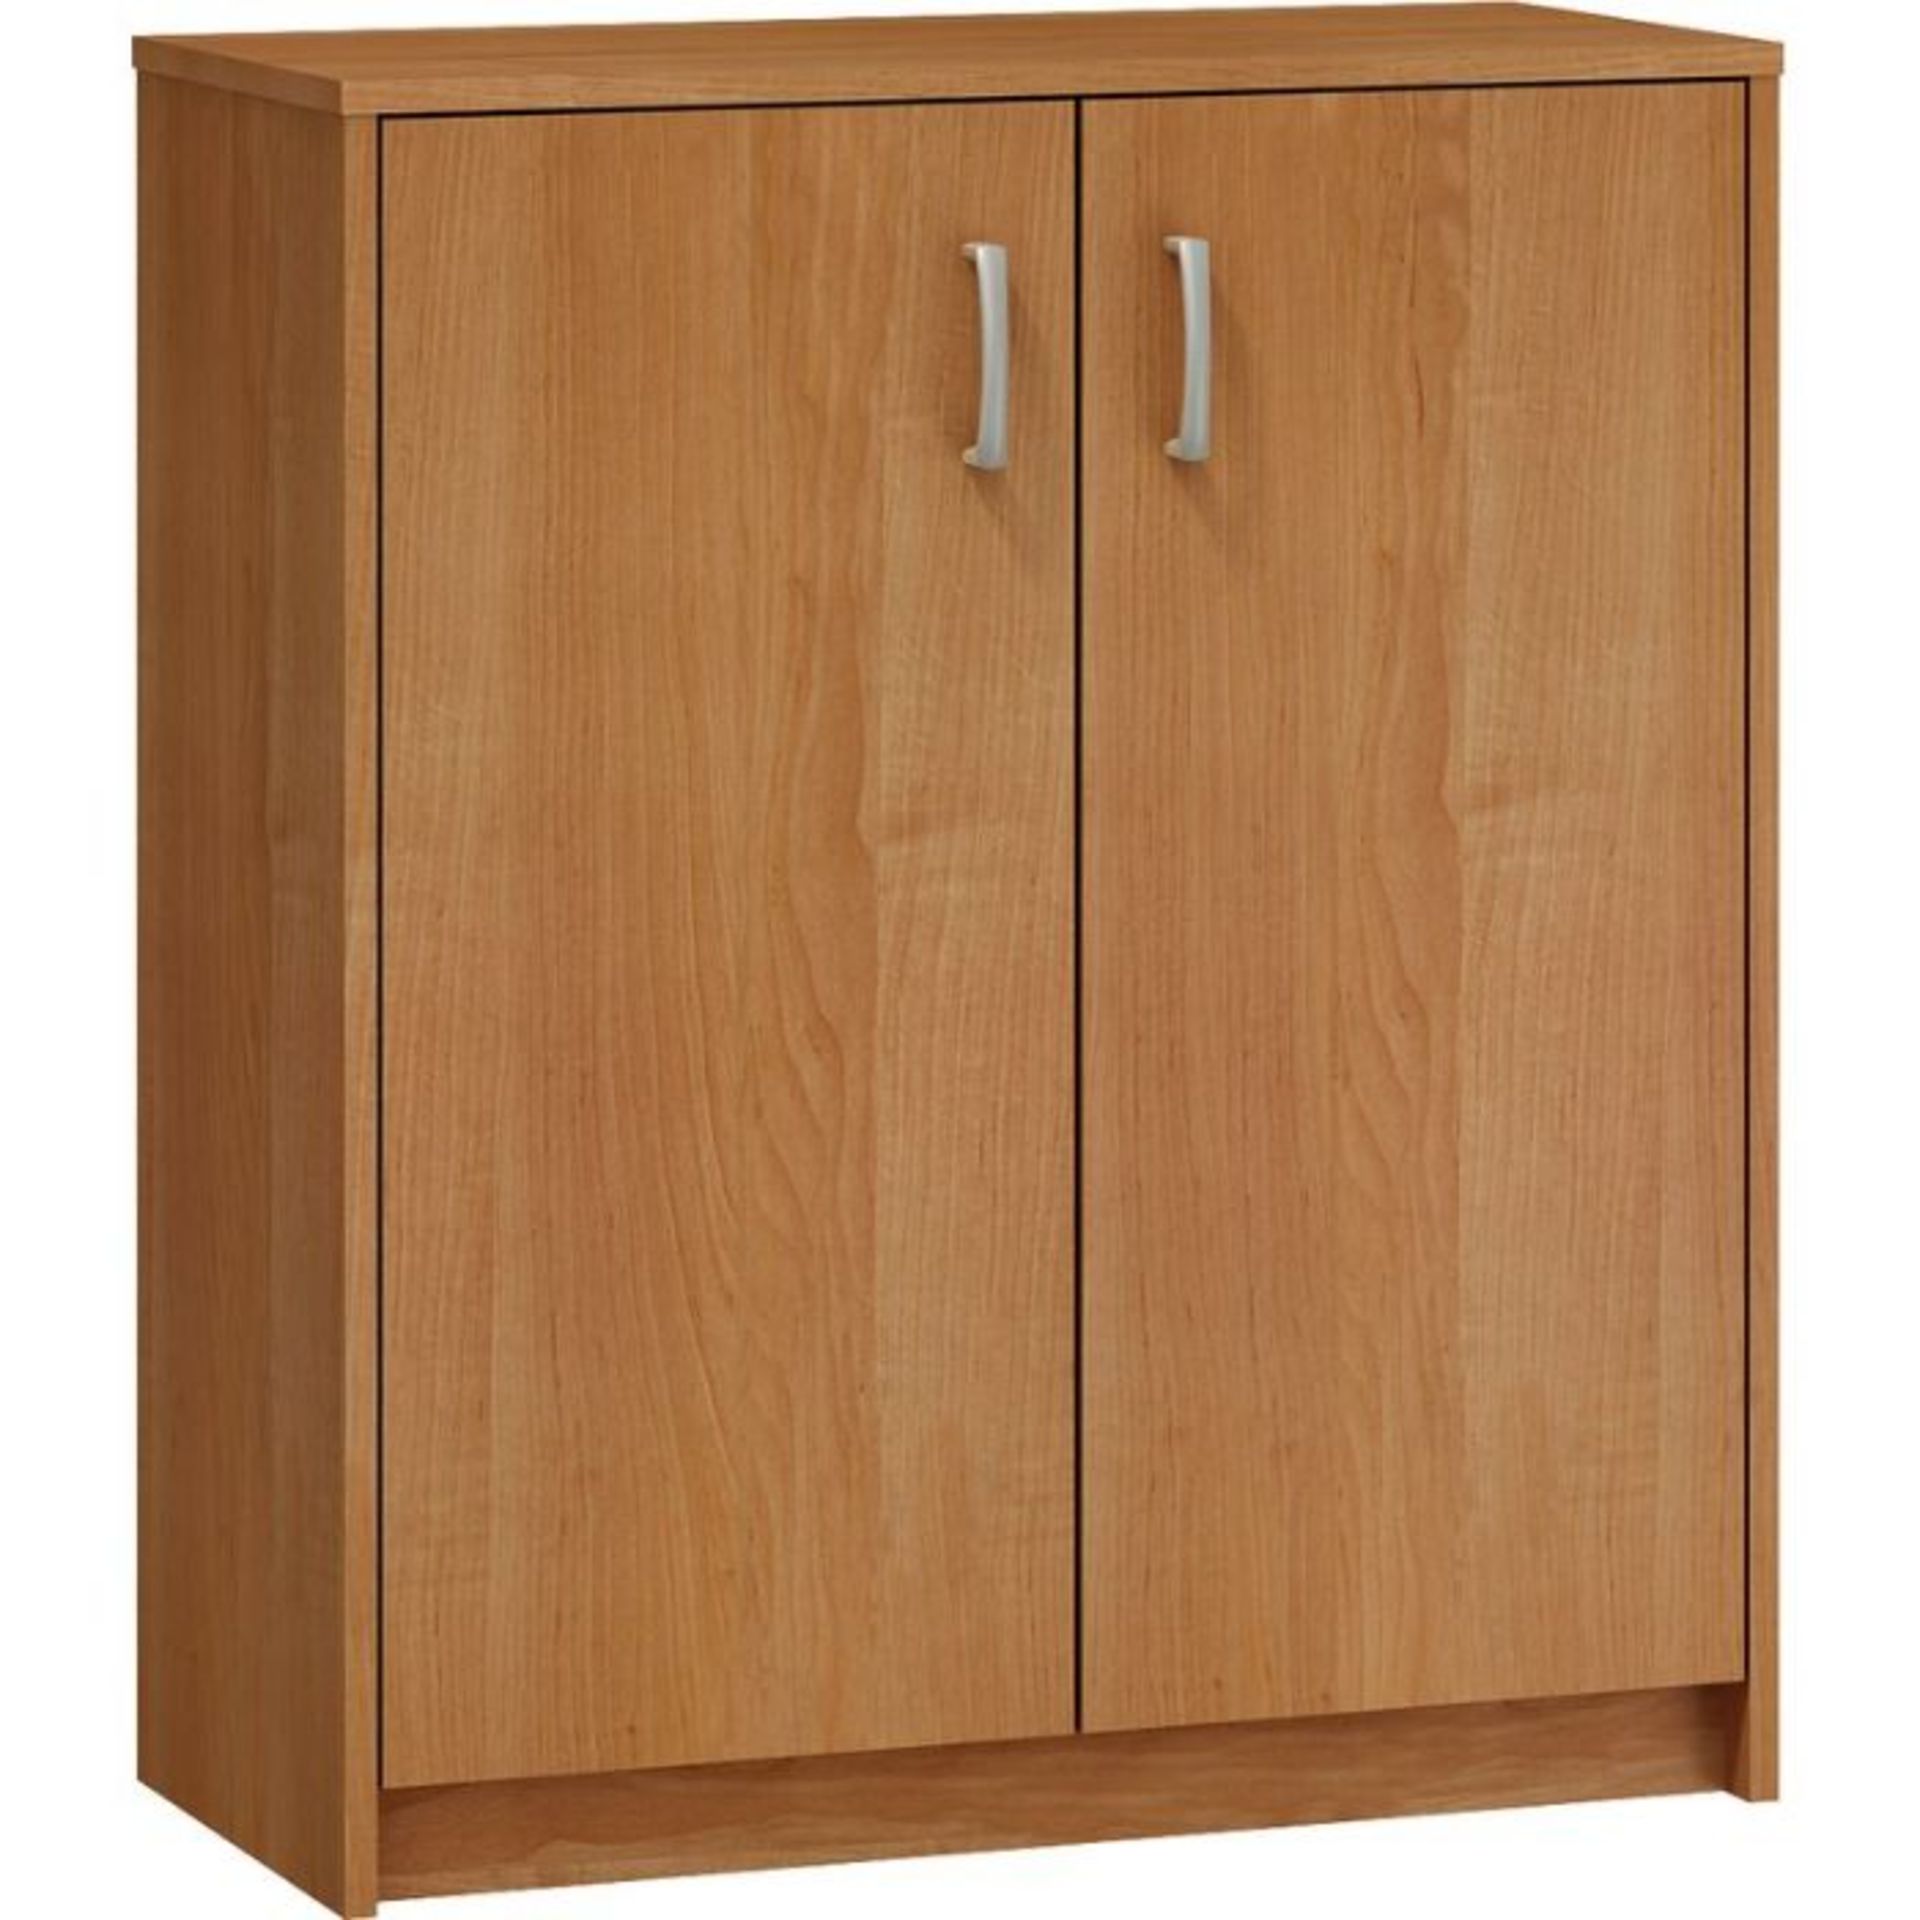 17 Stories,2 Door Storage CabinetRRP -£122.99 (26138/11 -DNOR1868) (BOXED, RETURN, NOT CHECKED)